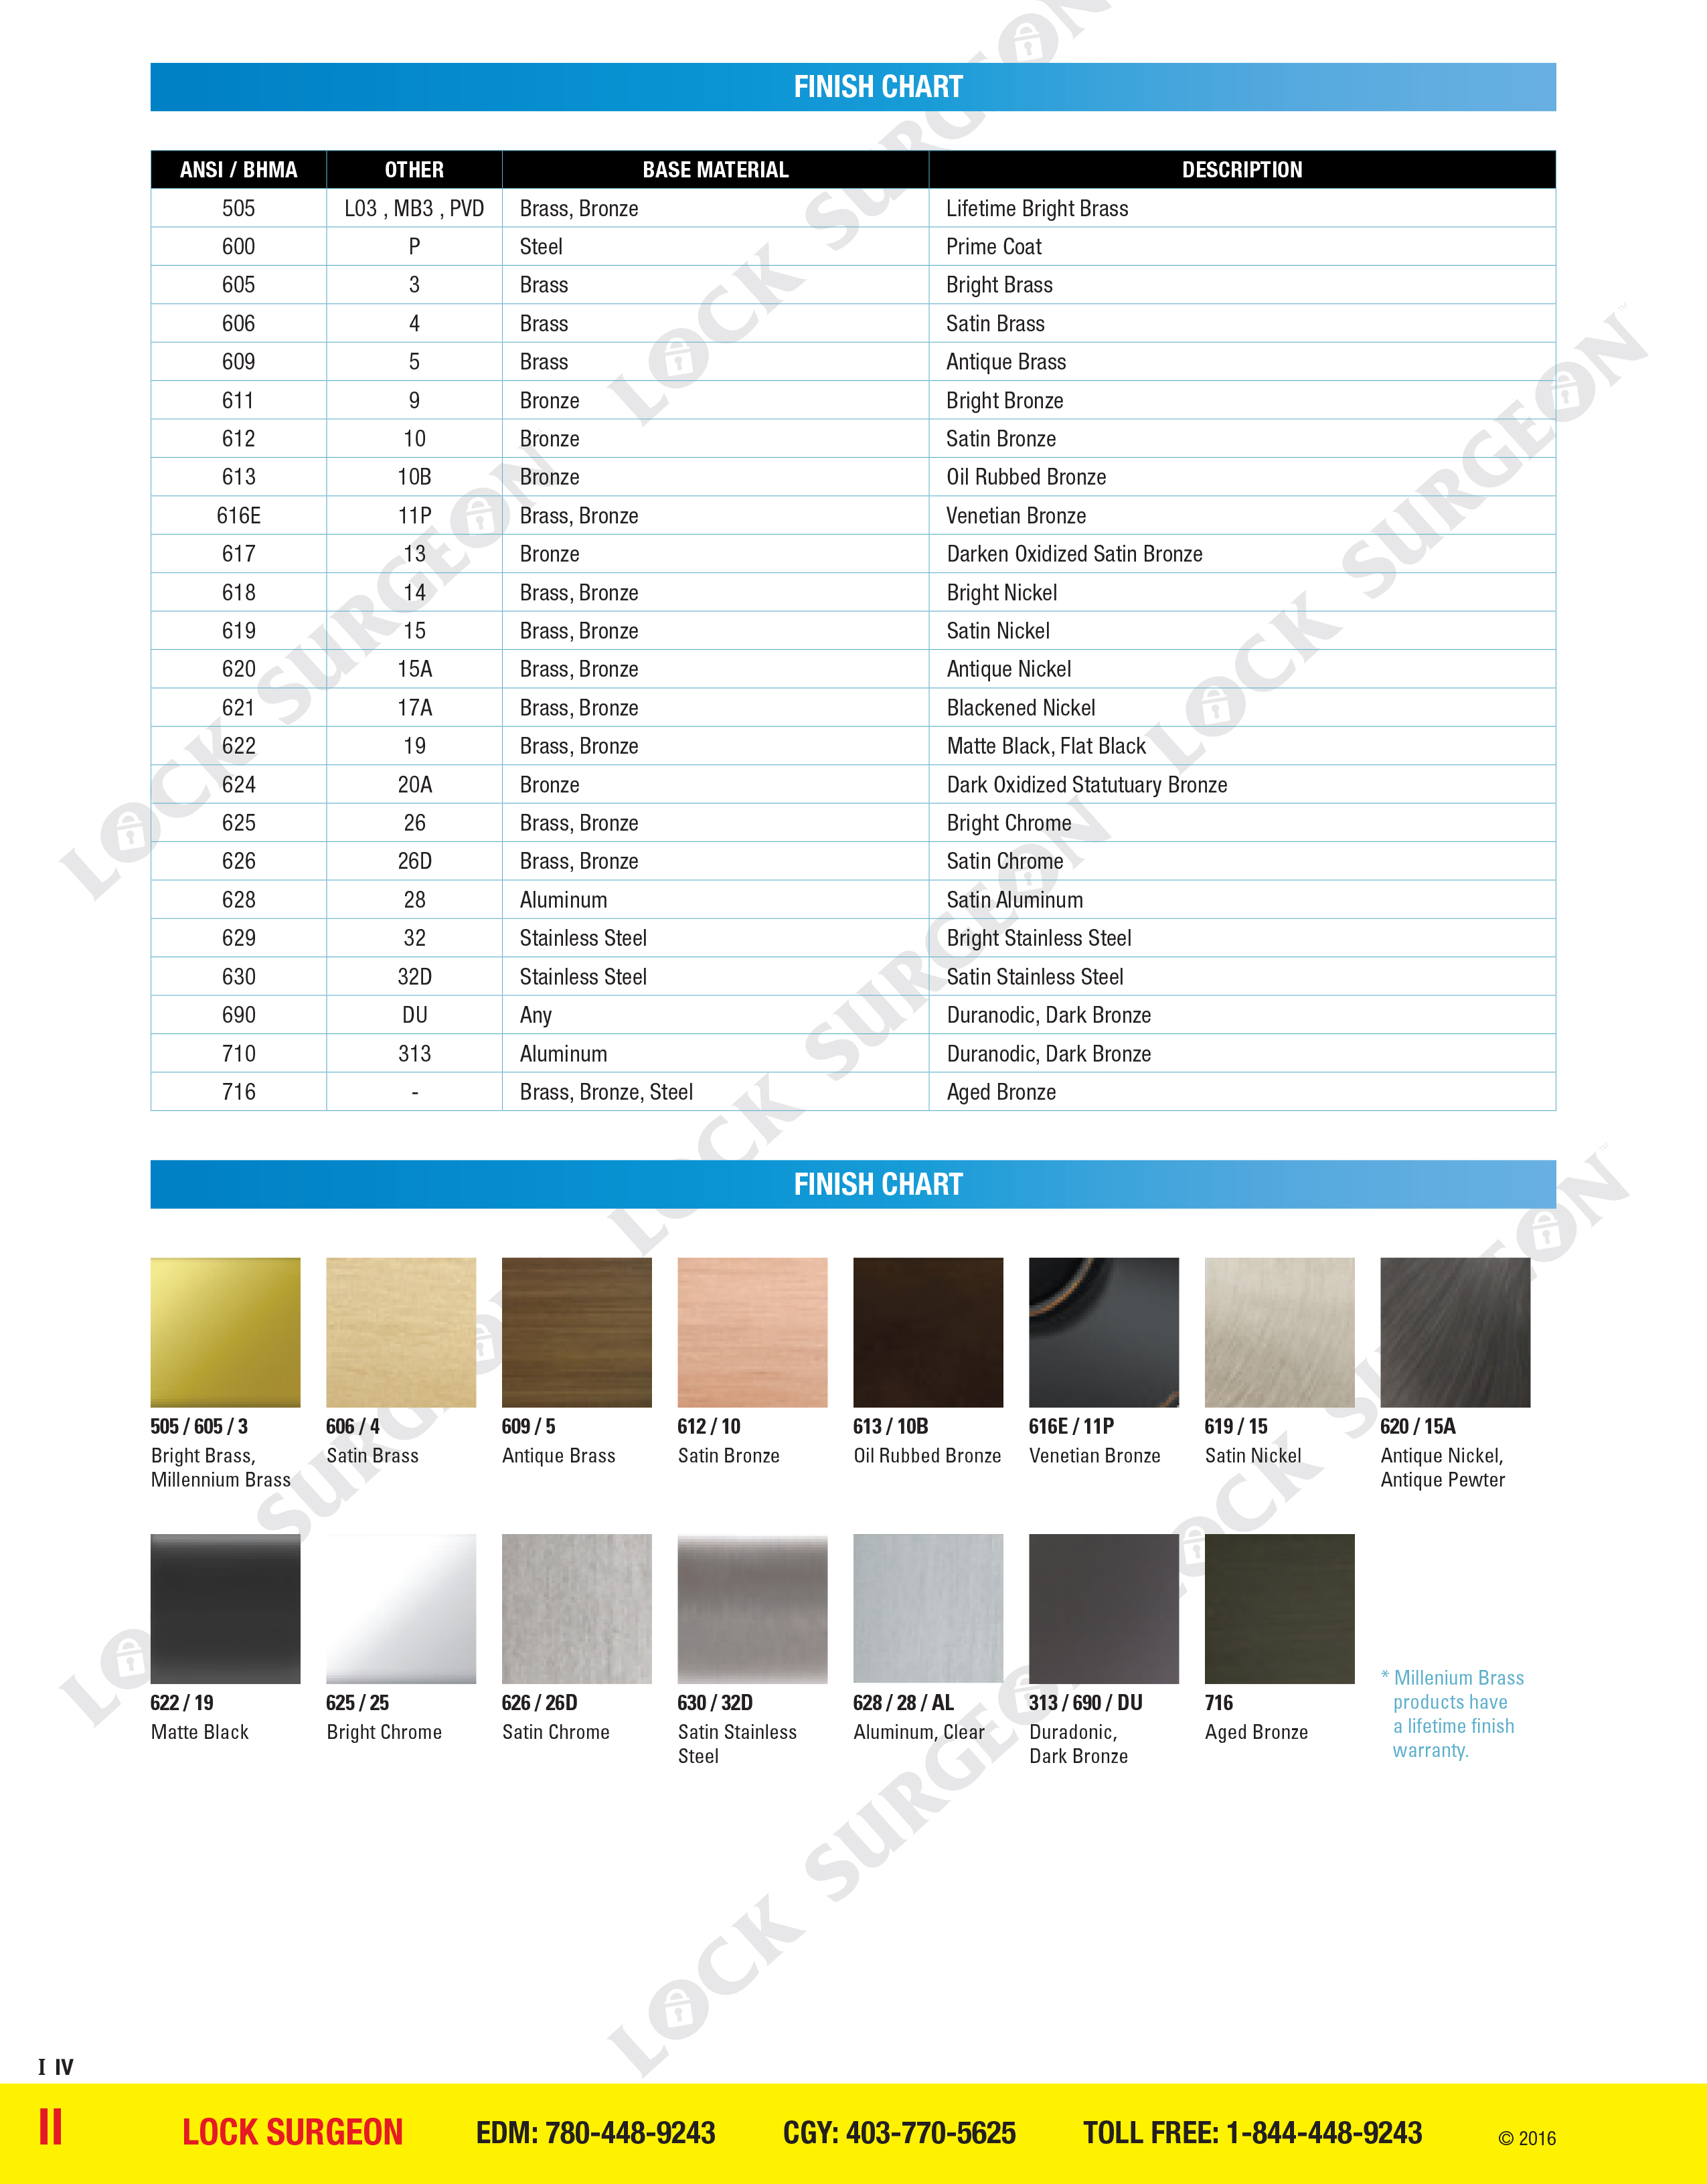 Reference chart for Colour finishes available on a variety of products at Lock Surgeon Chestermere.